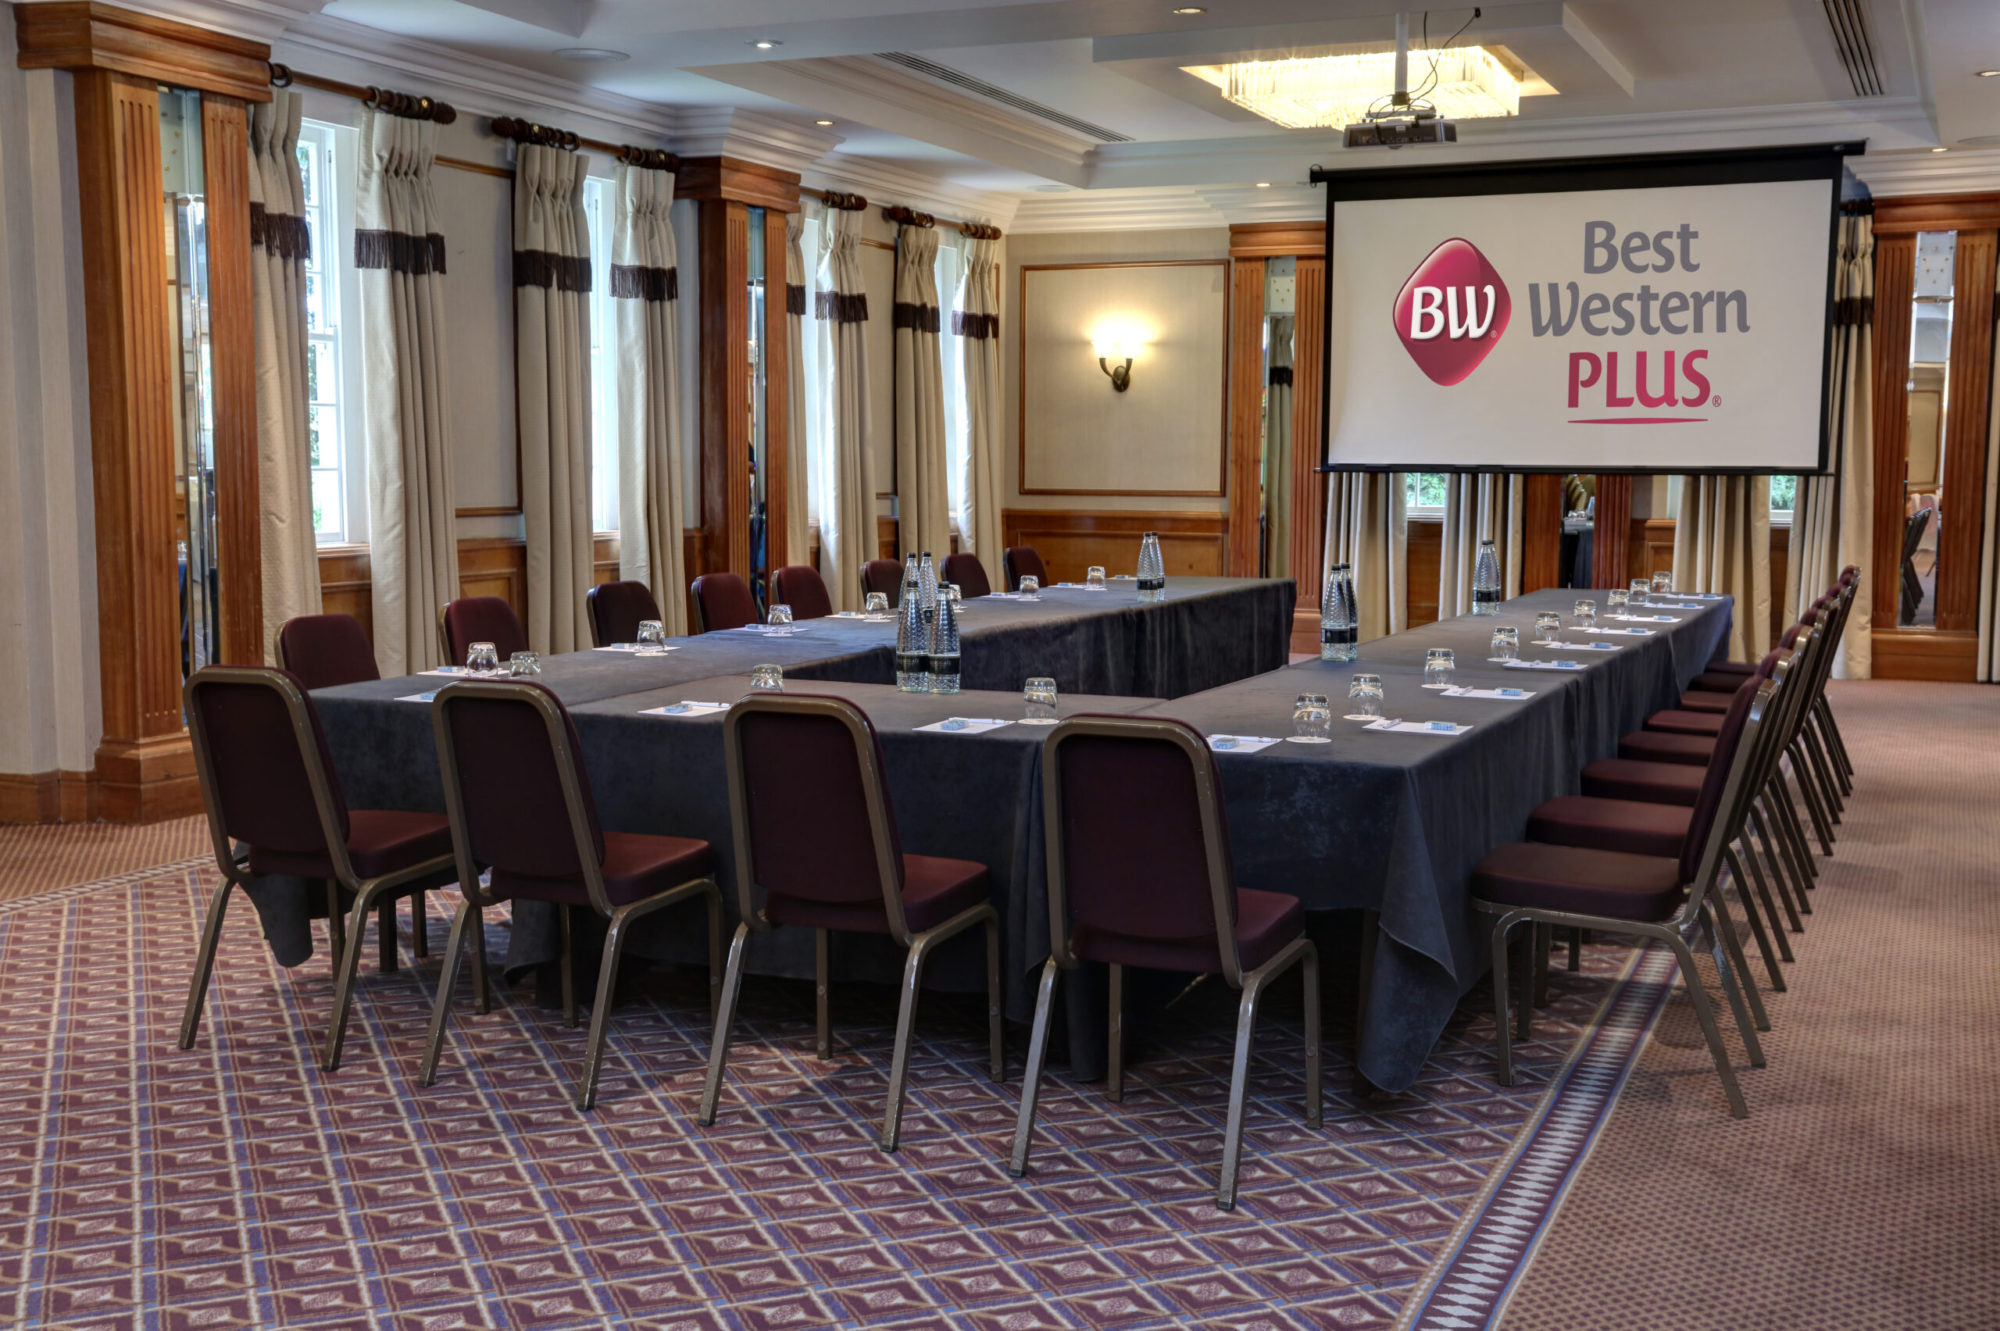 The Guernsey Meeting Room